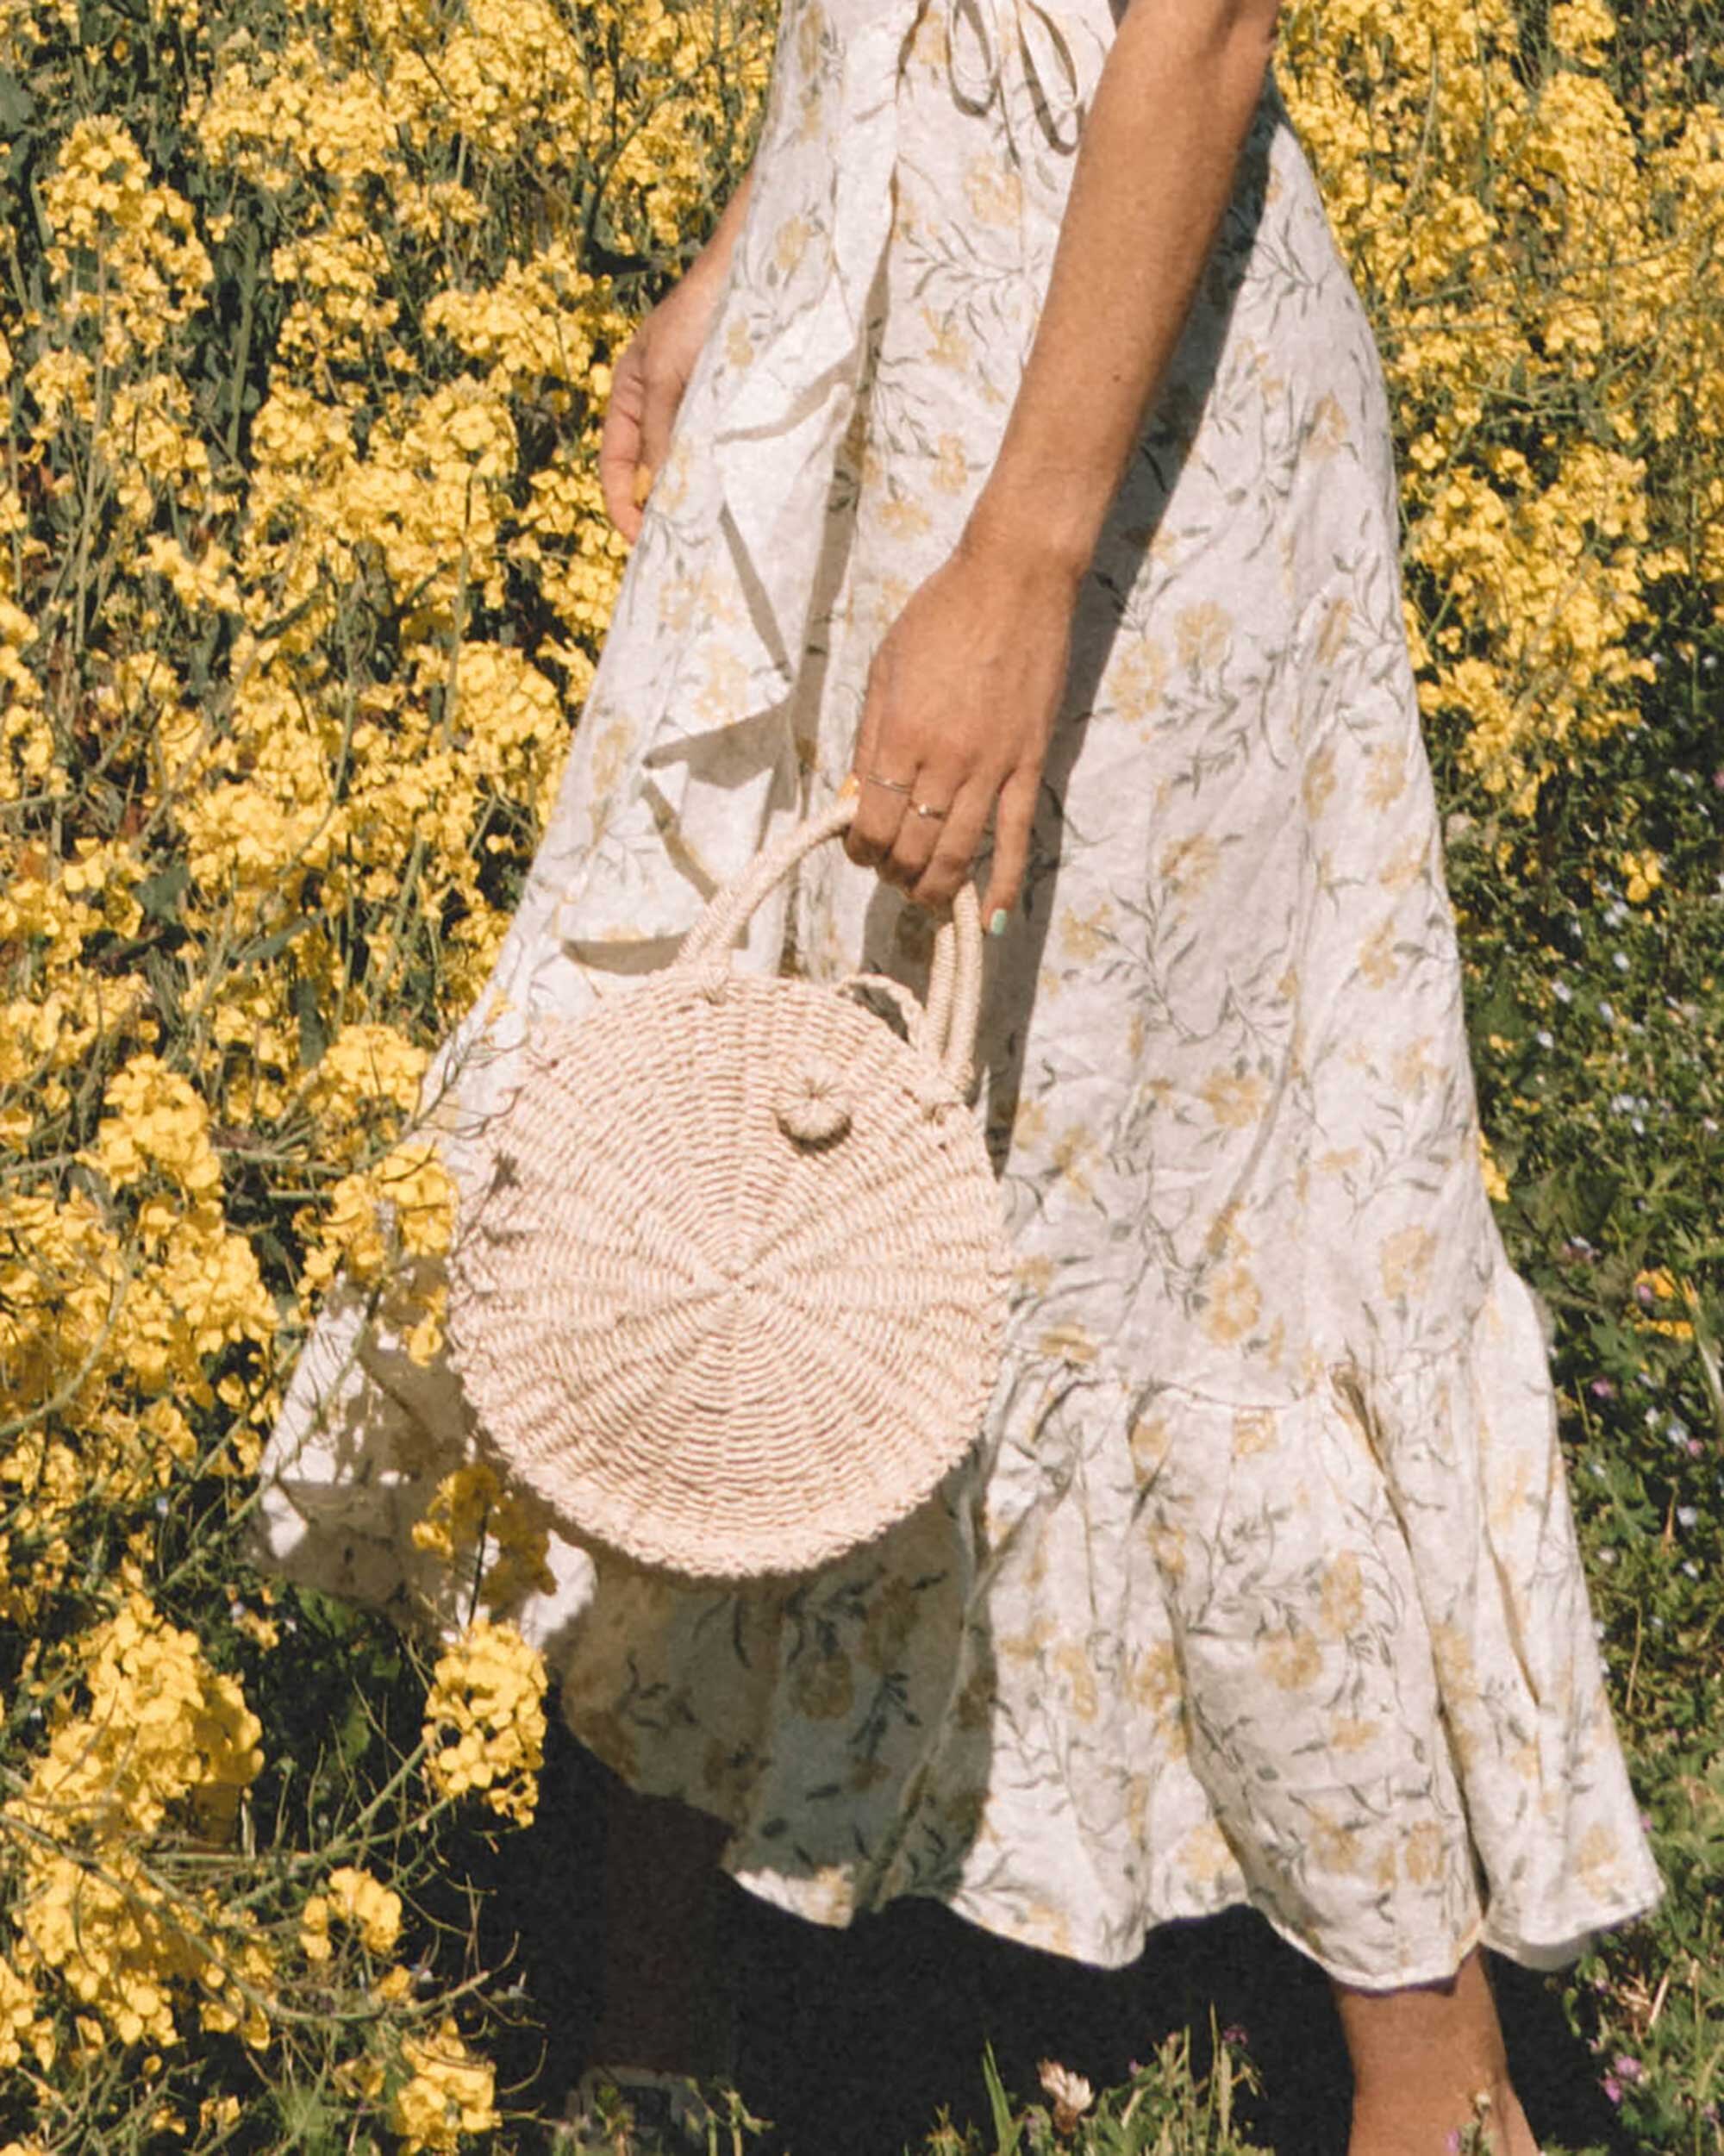 Sarah+Butler+of+Sarah+Styles+Seattle+wears+And+Other+Stories+Ruffled+Linen+Wrap+Midi+Dress+and+round+woven+bag+in+England+Countryside+for+the+perfect+floral+summer+dress+|+@sarahchristine+-3-3.jpg